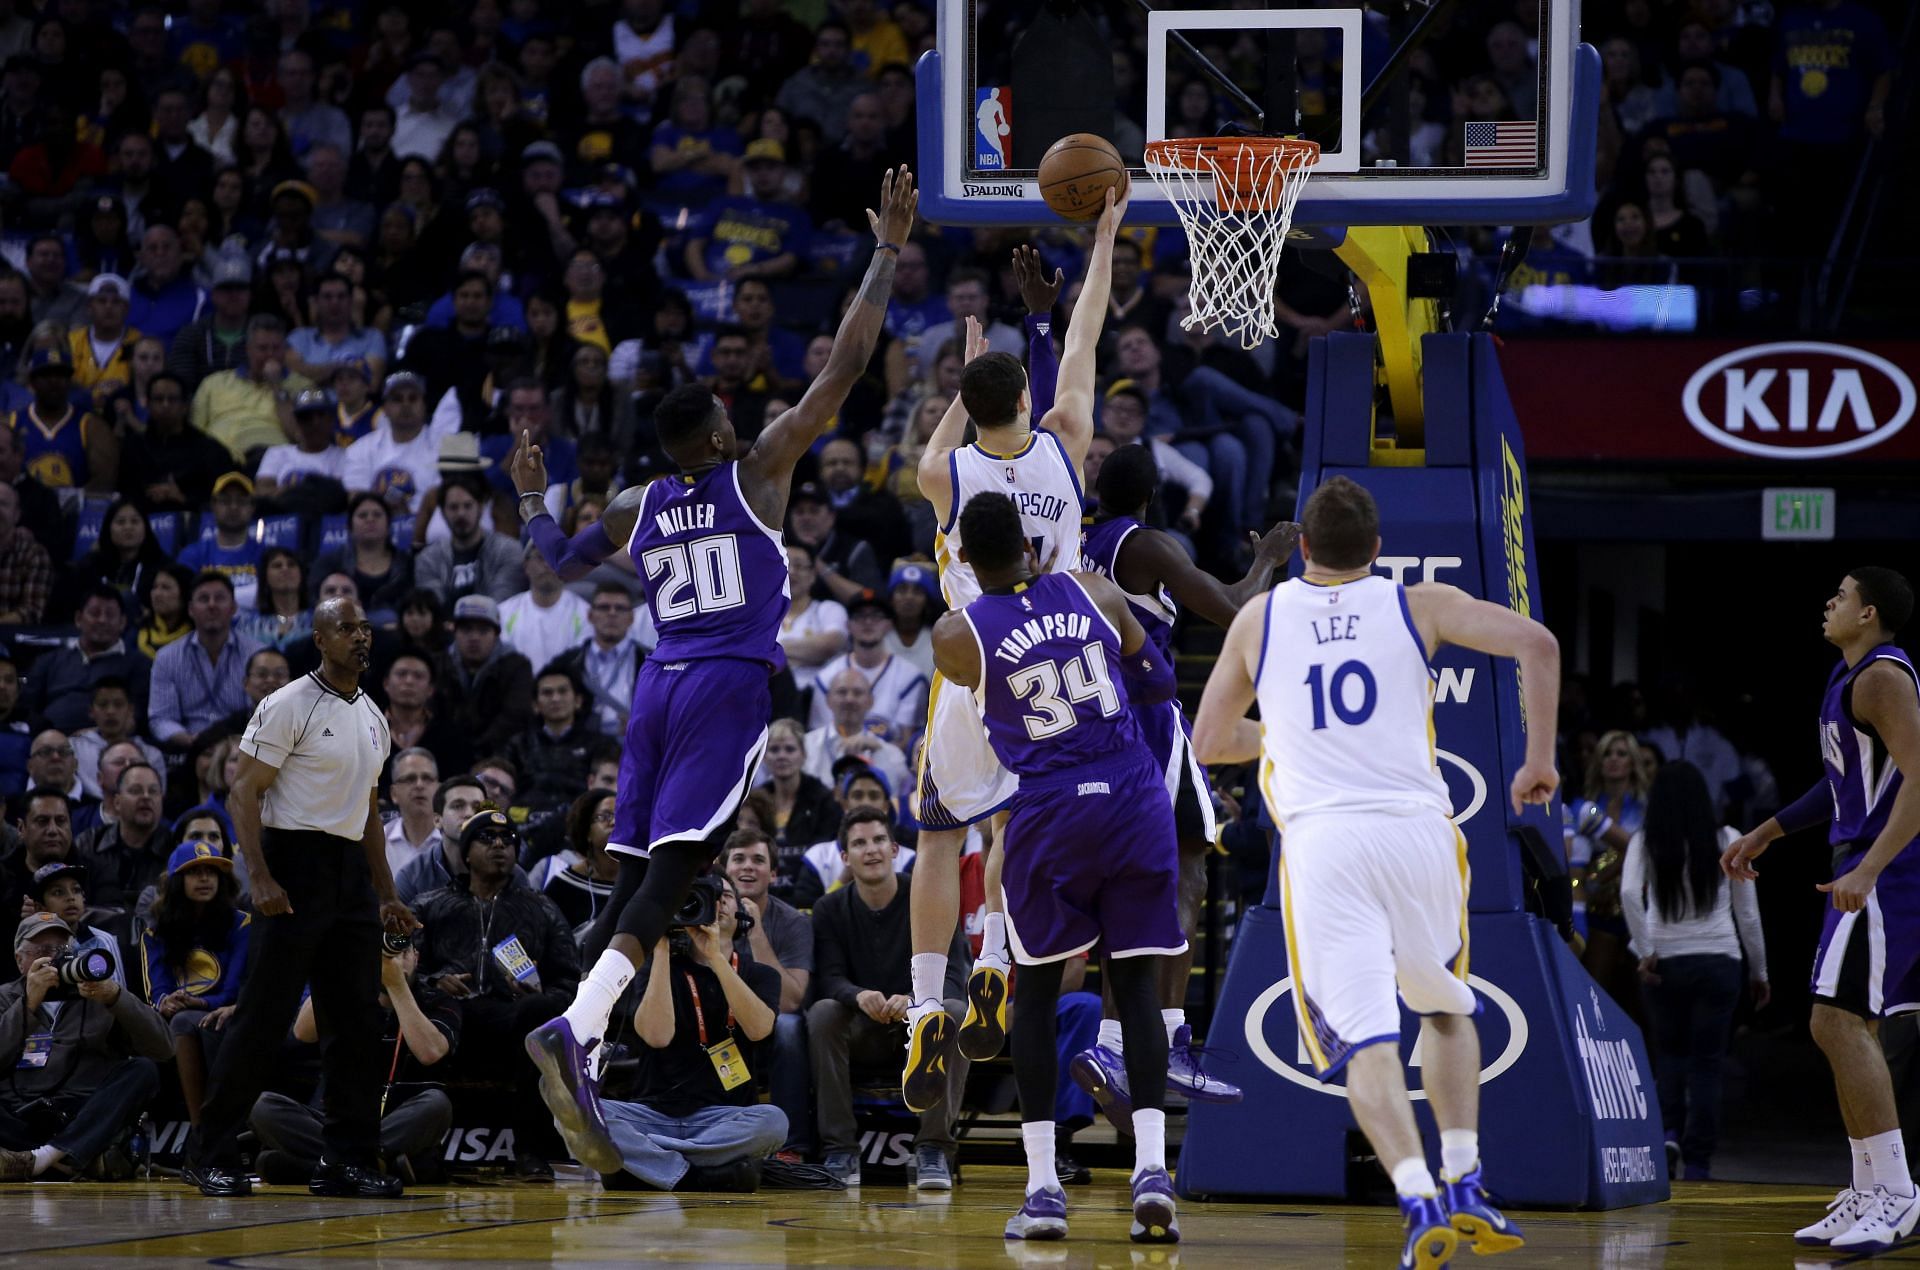 Klay Thompson #11 of the Golden State Warriors goes up for a shot on Quincy Miller #20 of the Sacramento Kings